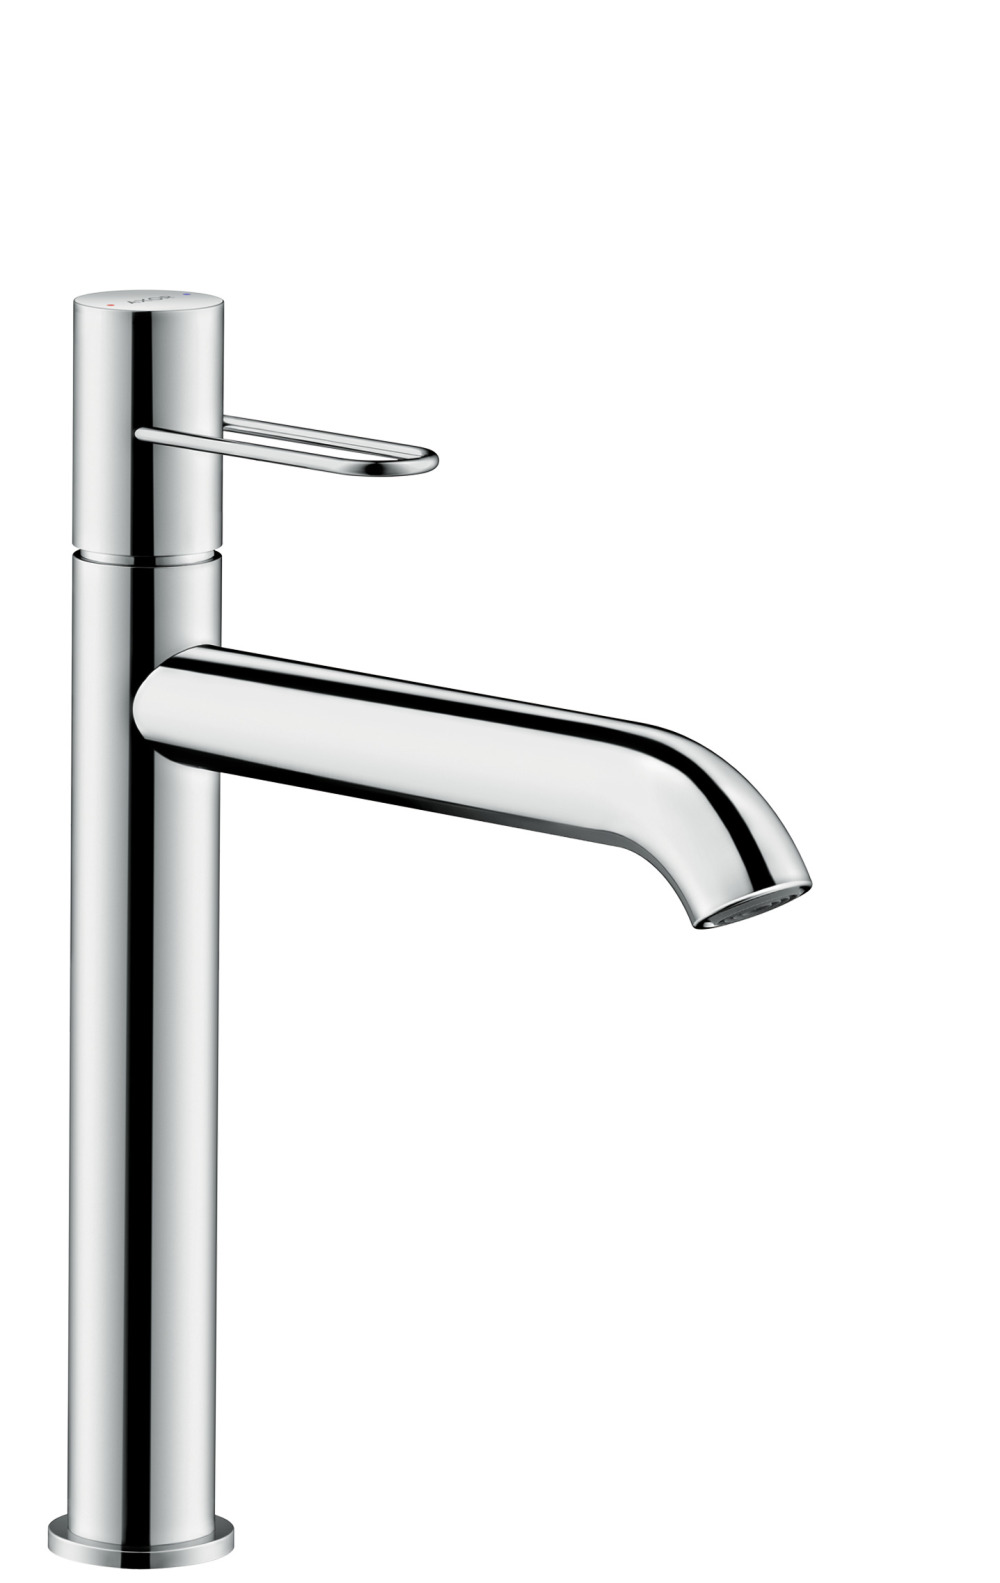 Baterie lavoar Hansgrohe Axor Uno 190 inalta corp 18 9 cm crom 190